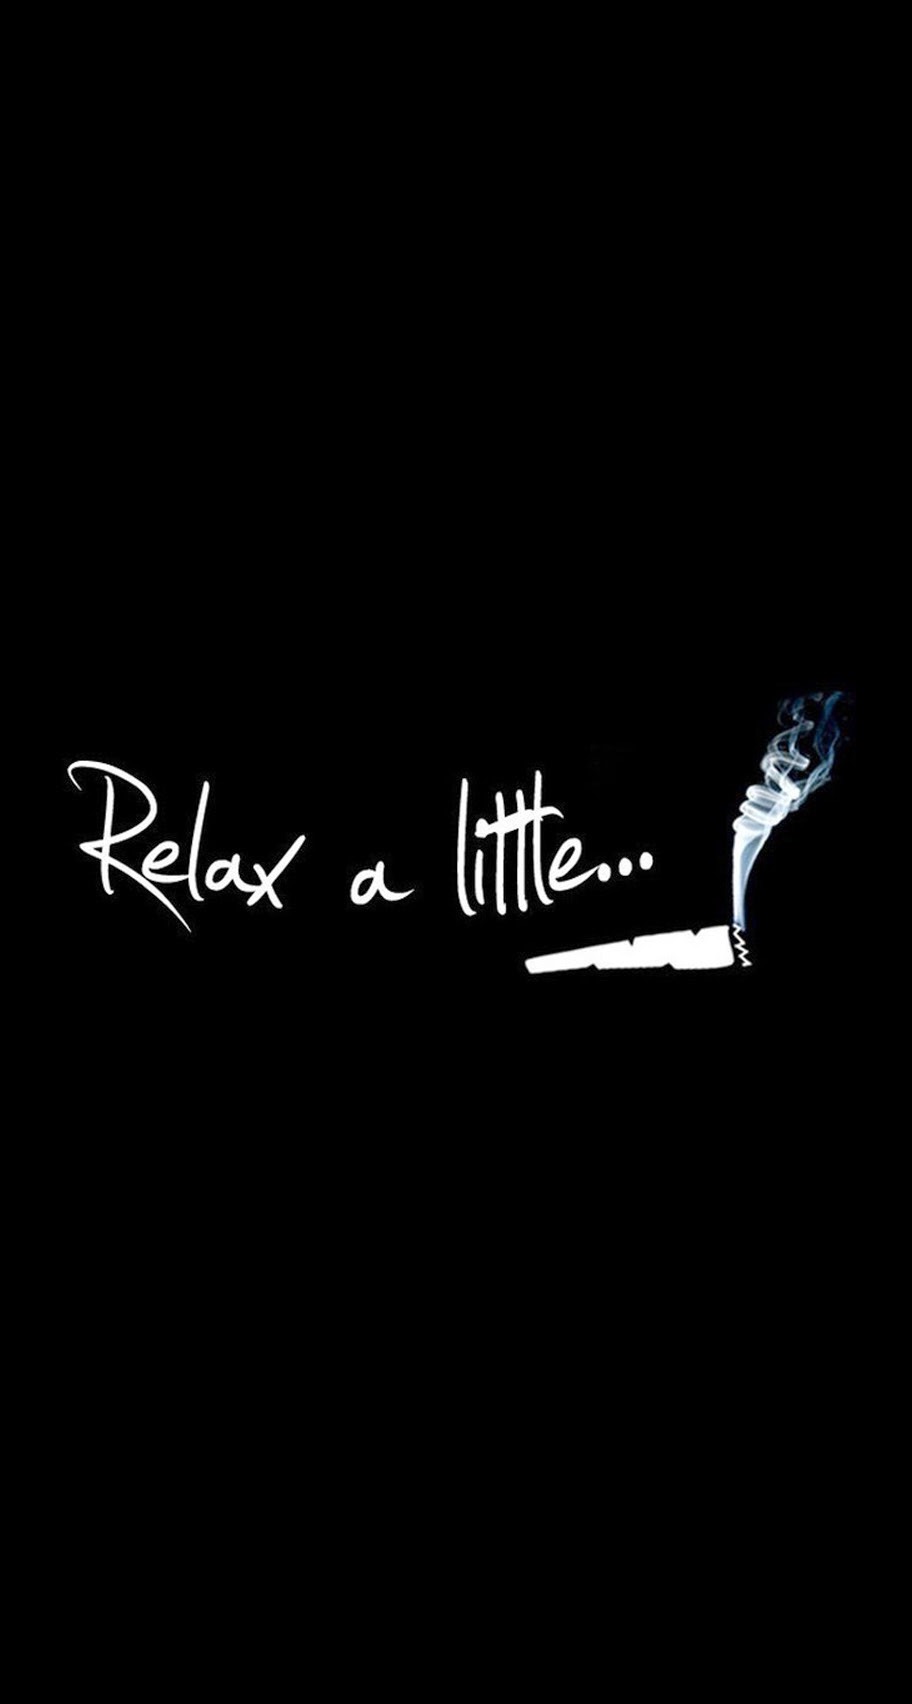 Relax-A-Little-Smoke-Weed-iPhone-6-Plus-HD-Wallpaper.